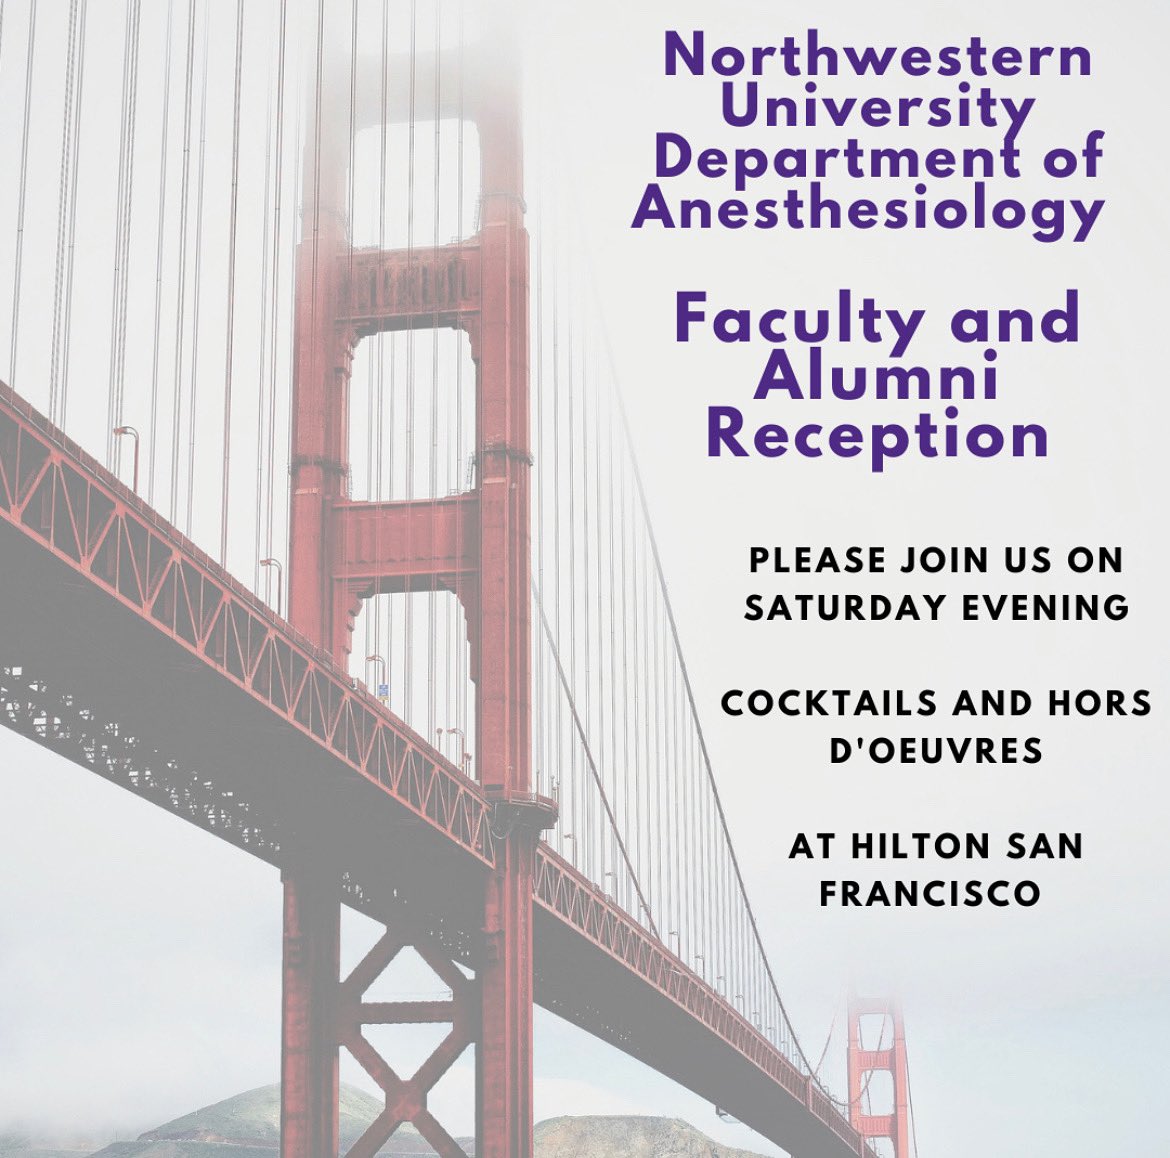 We are excited to see our alumni at #ANES23 in San Francisco this Weekend! Please join us! • Hilton San Francisco: Golden Gate 7 7:00 PM - 9:00 PM Saturday, Ocotber 14 @nuanesthesiares @asa_ha @northwesternmedicine @nmanesthesiacritcare @NMCTAnes